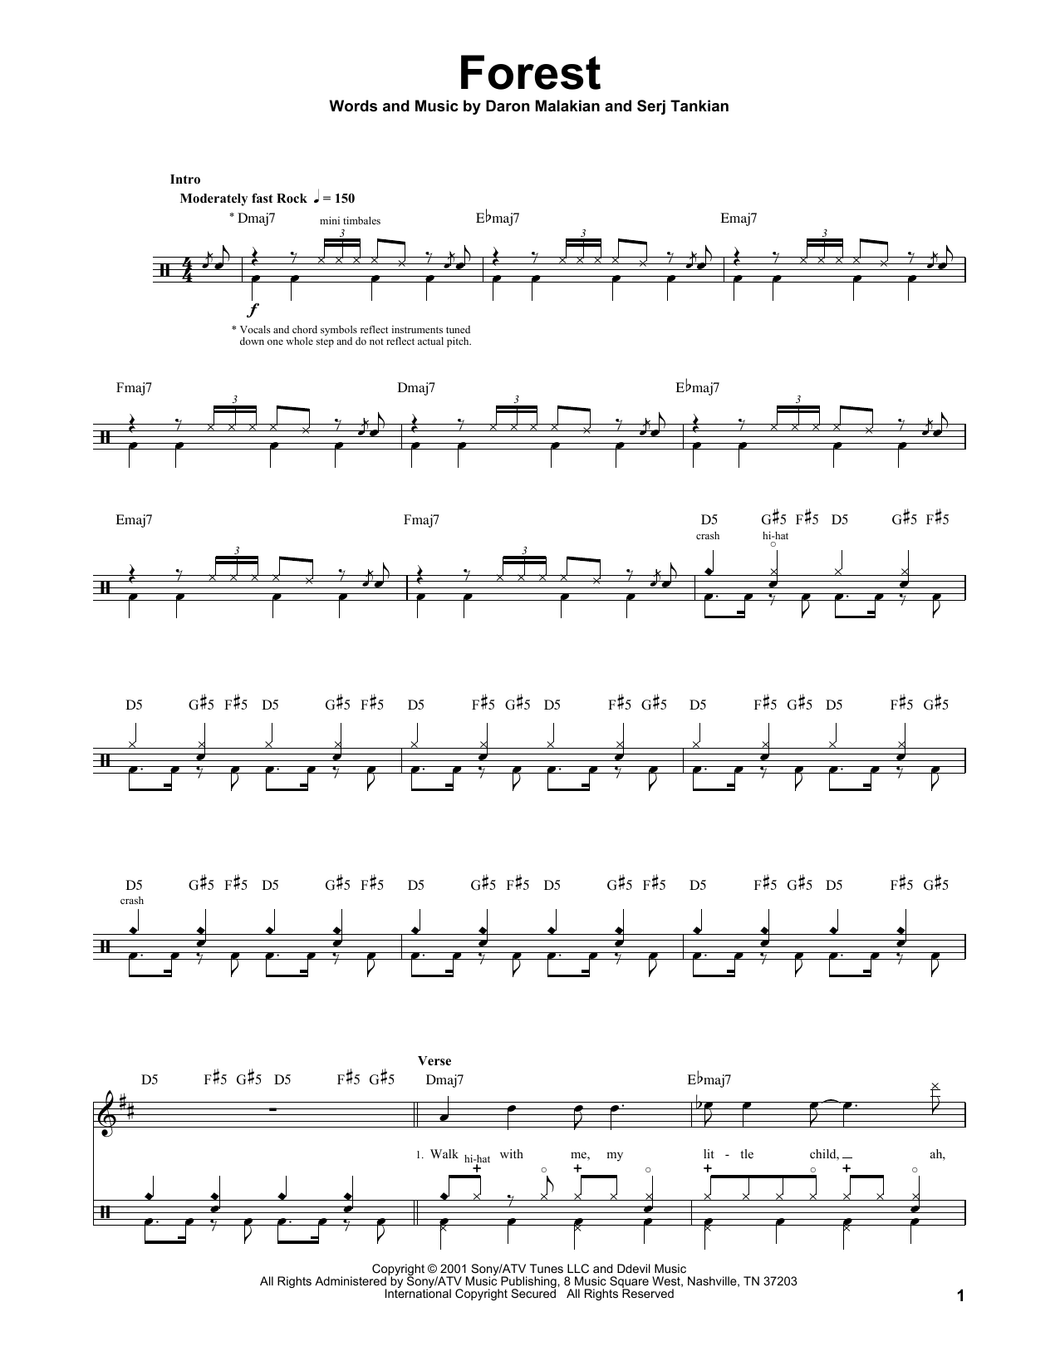 Forest - System of a Down - Full Drum Transcription / Drum Sheet Music - SheetMusicDirect DT